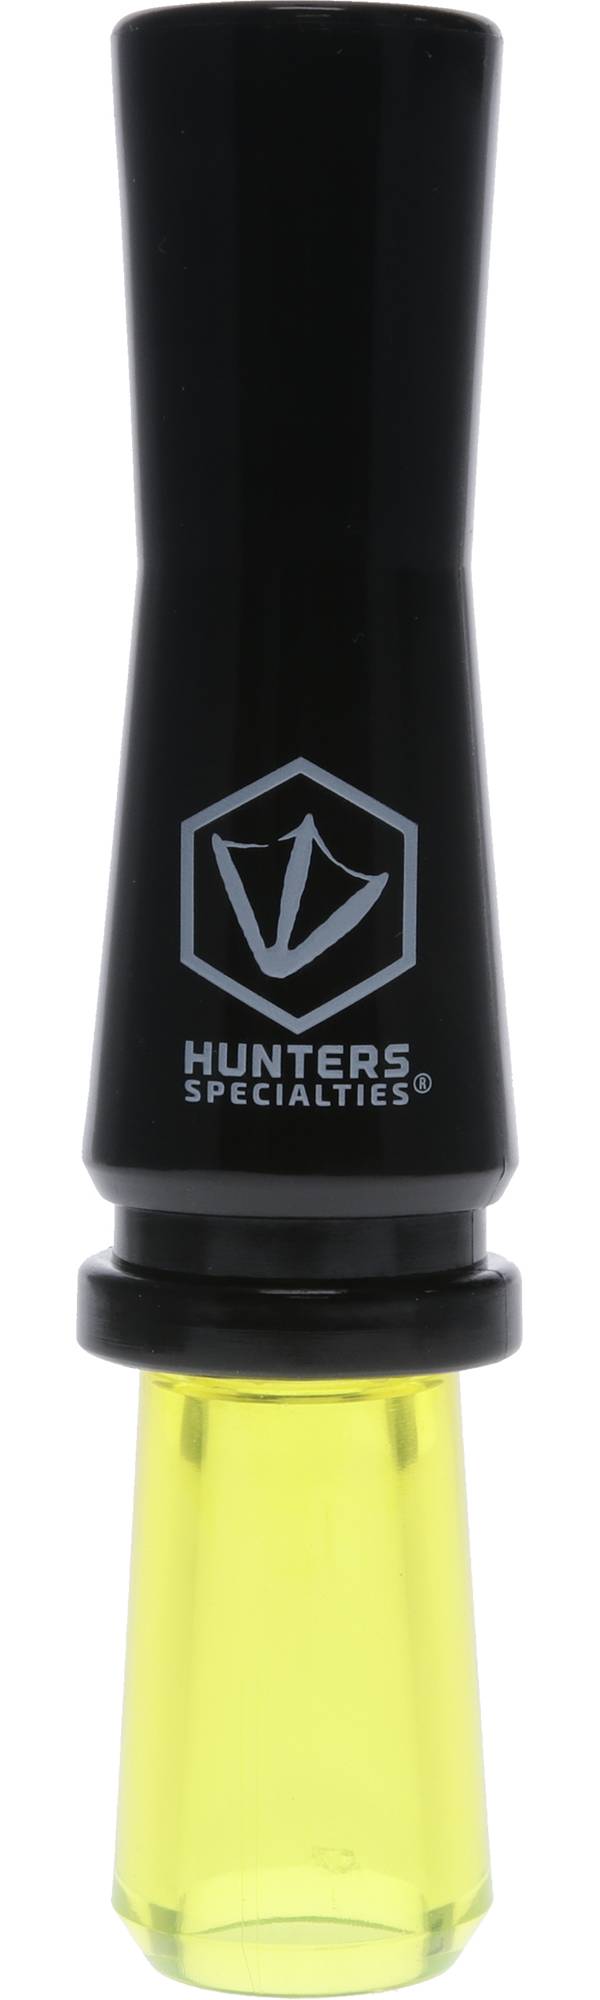 Hunter's Specialties Muddy Single Reed Goose Call product image